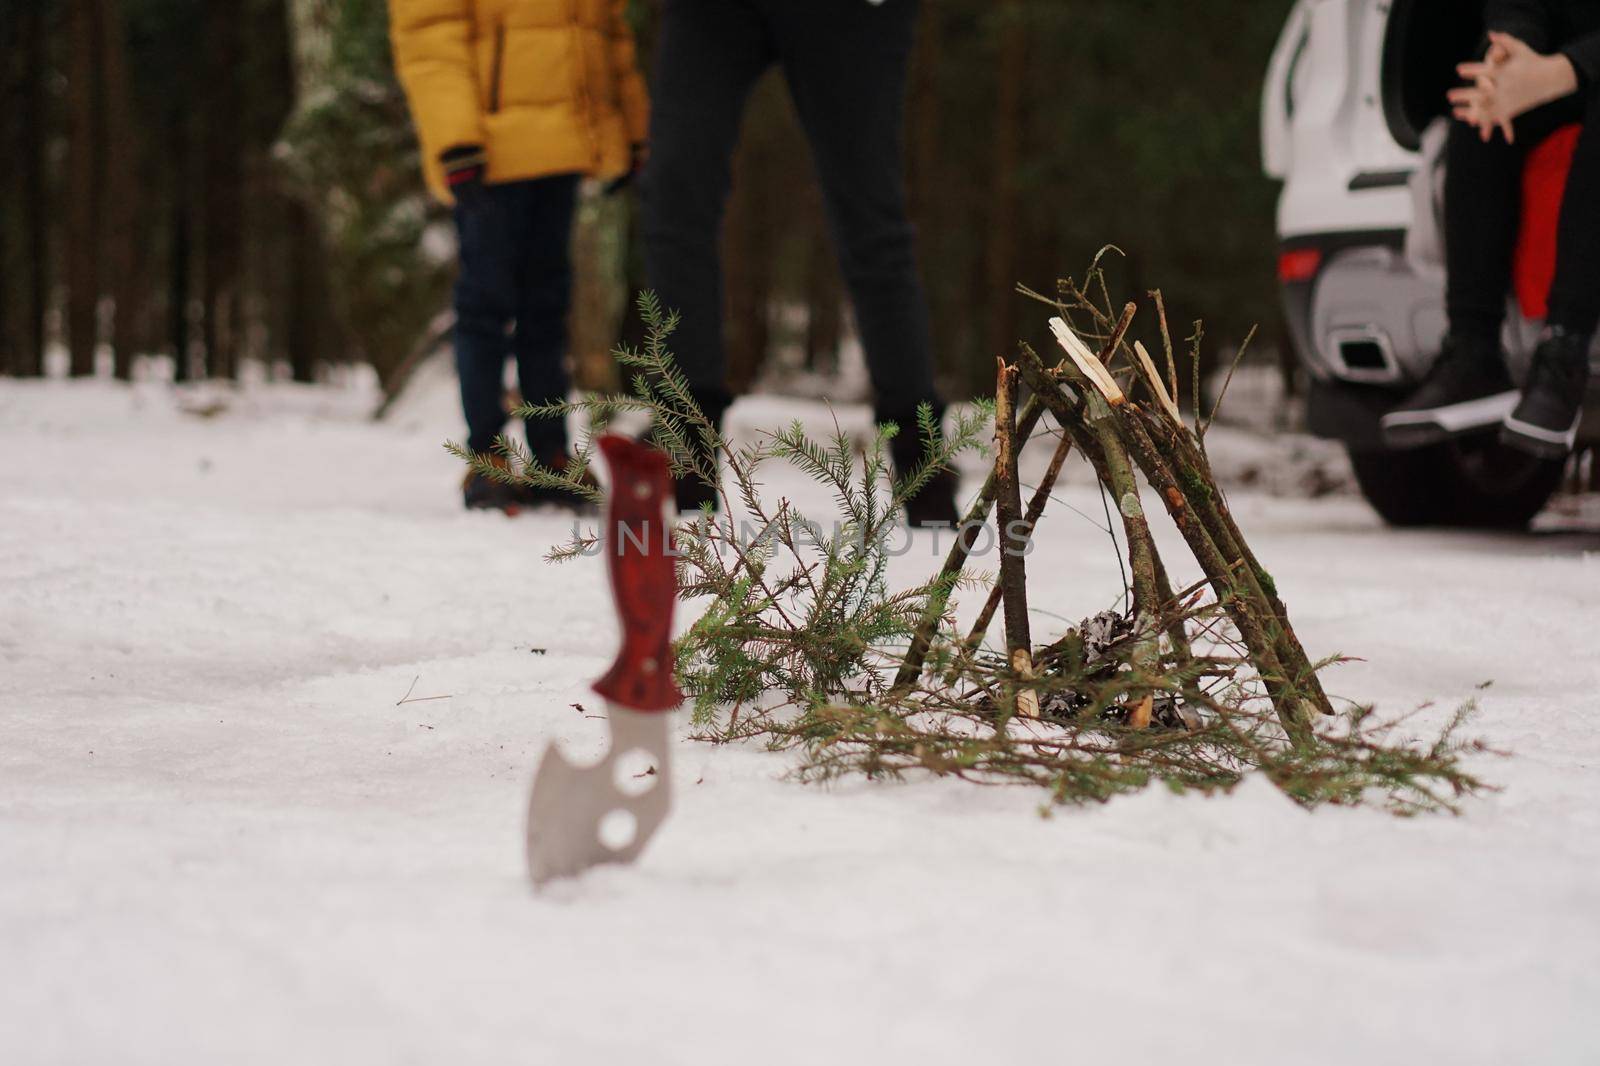 Tourist knife and bonfire in the winter forest. by natali_brill